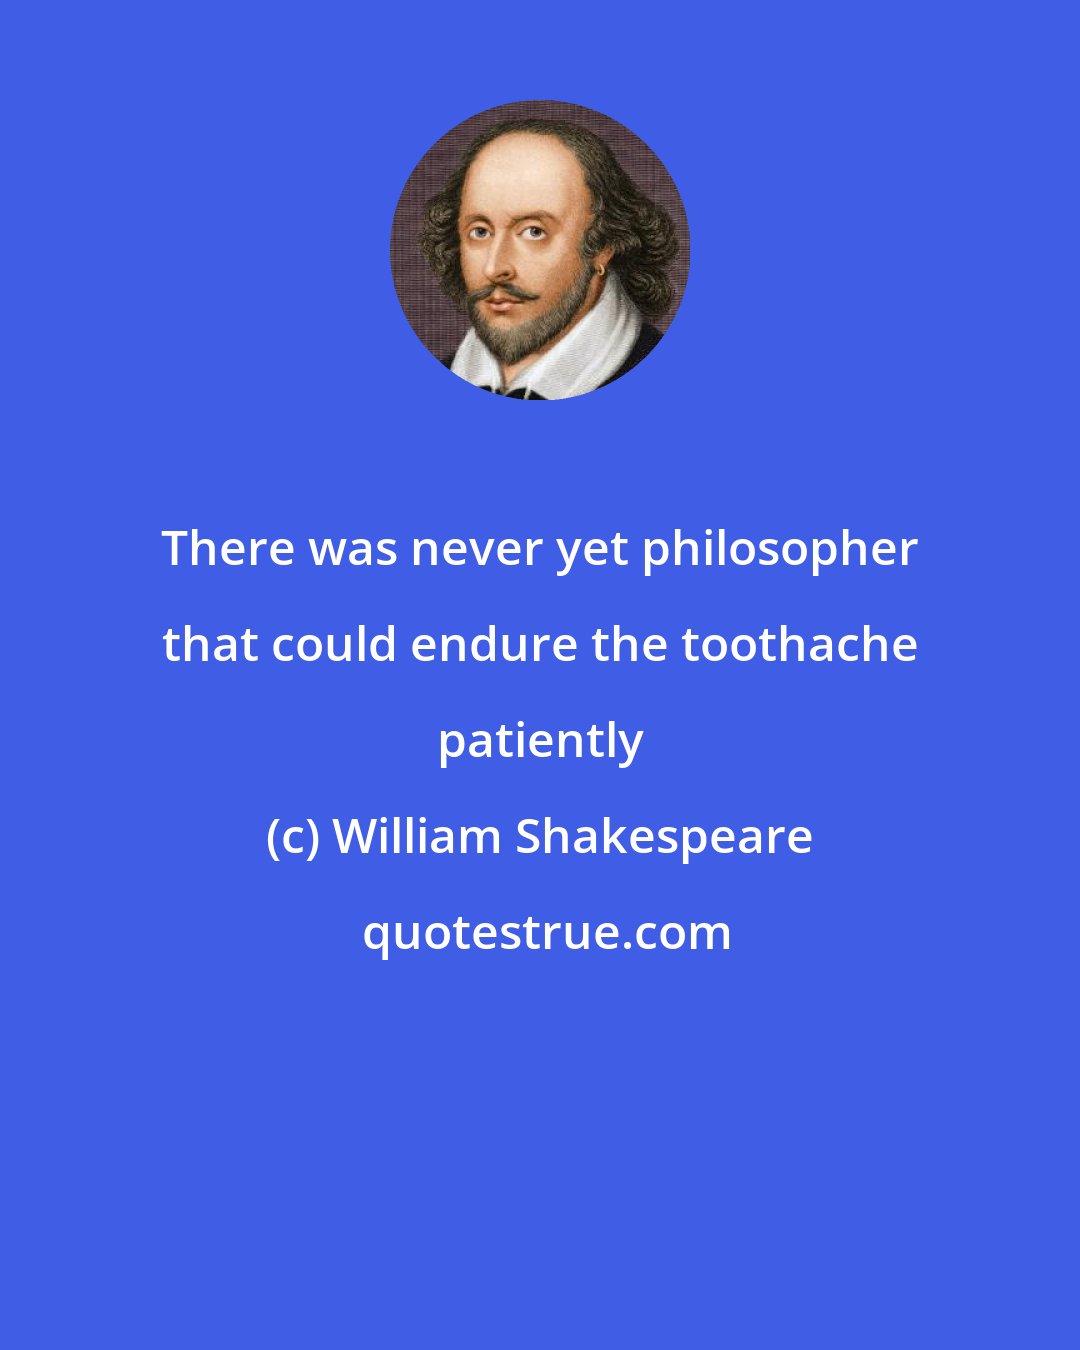 William Shakespeare: There was never yet philosopher that could endure the toothache patiently